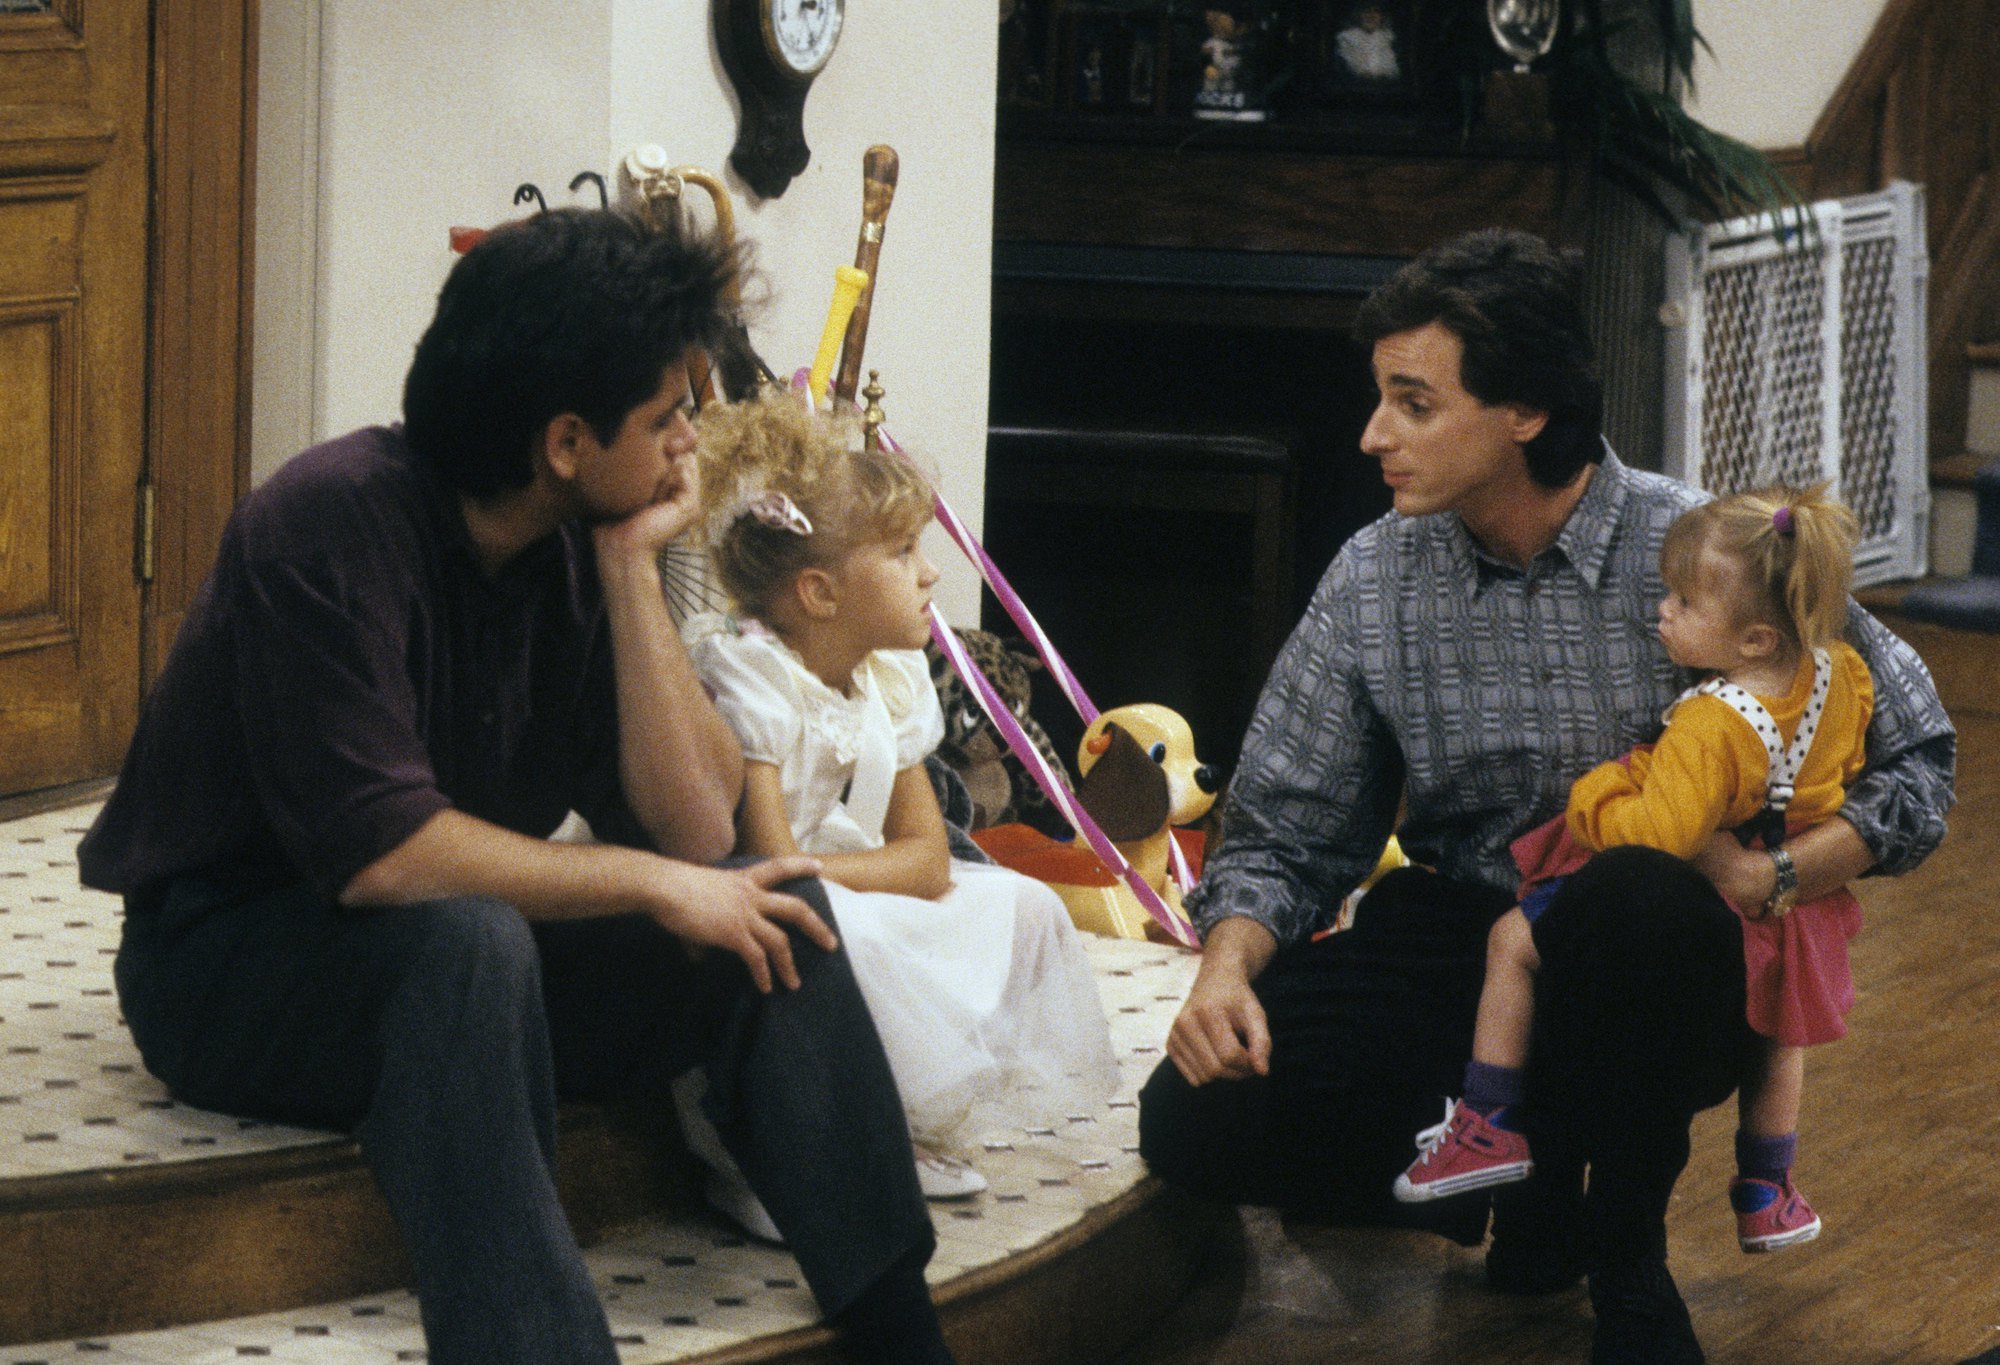 'Full house' stars Bob Saget and John Stamos sit with Jodie Sweetin and an Olsen twin